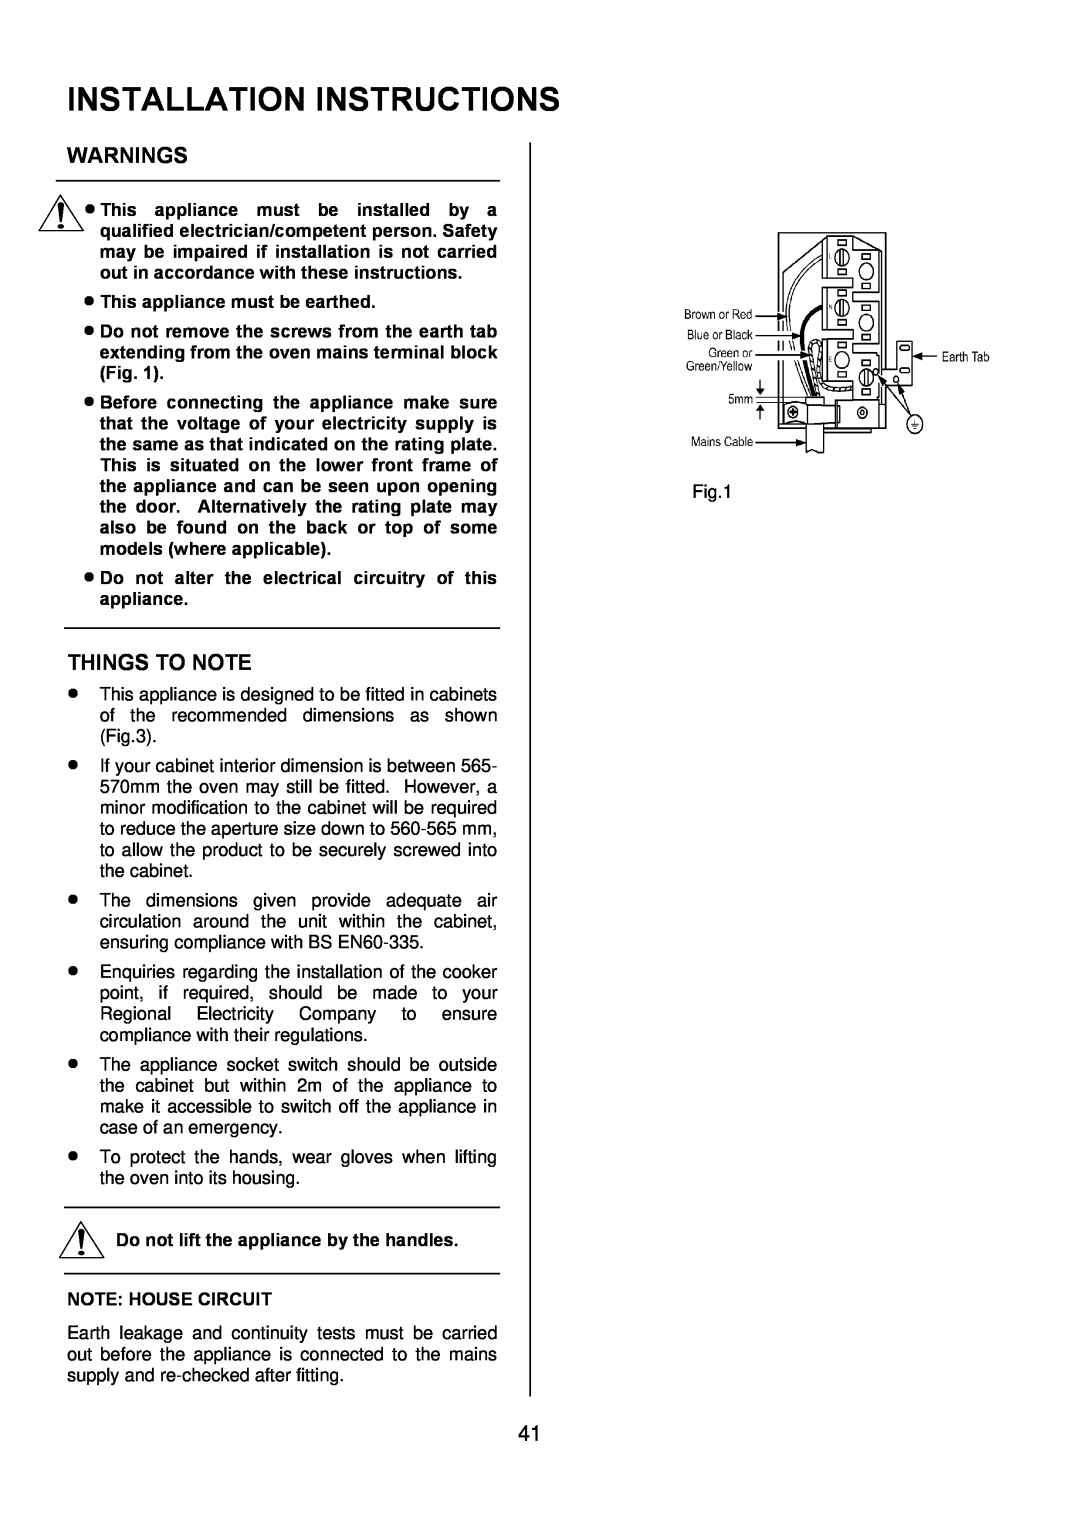 Zanussi ZOD 685 manual Installation Instructions, Warnings, This appliance must be earthed, Things To Note 